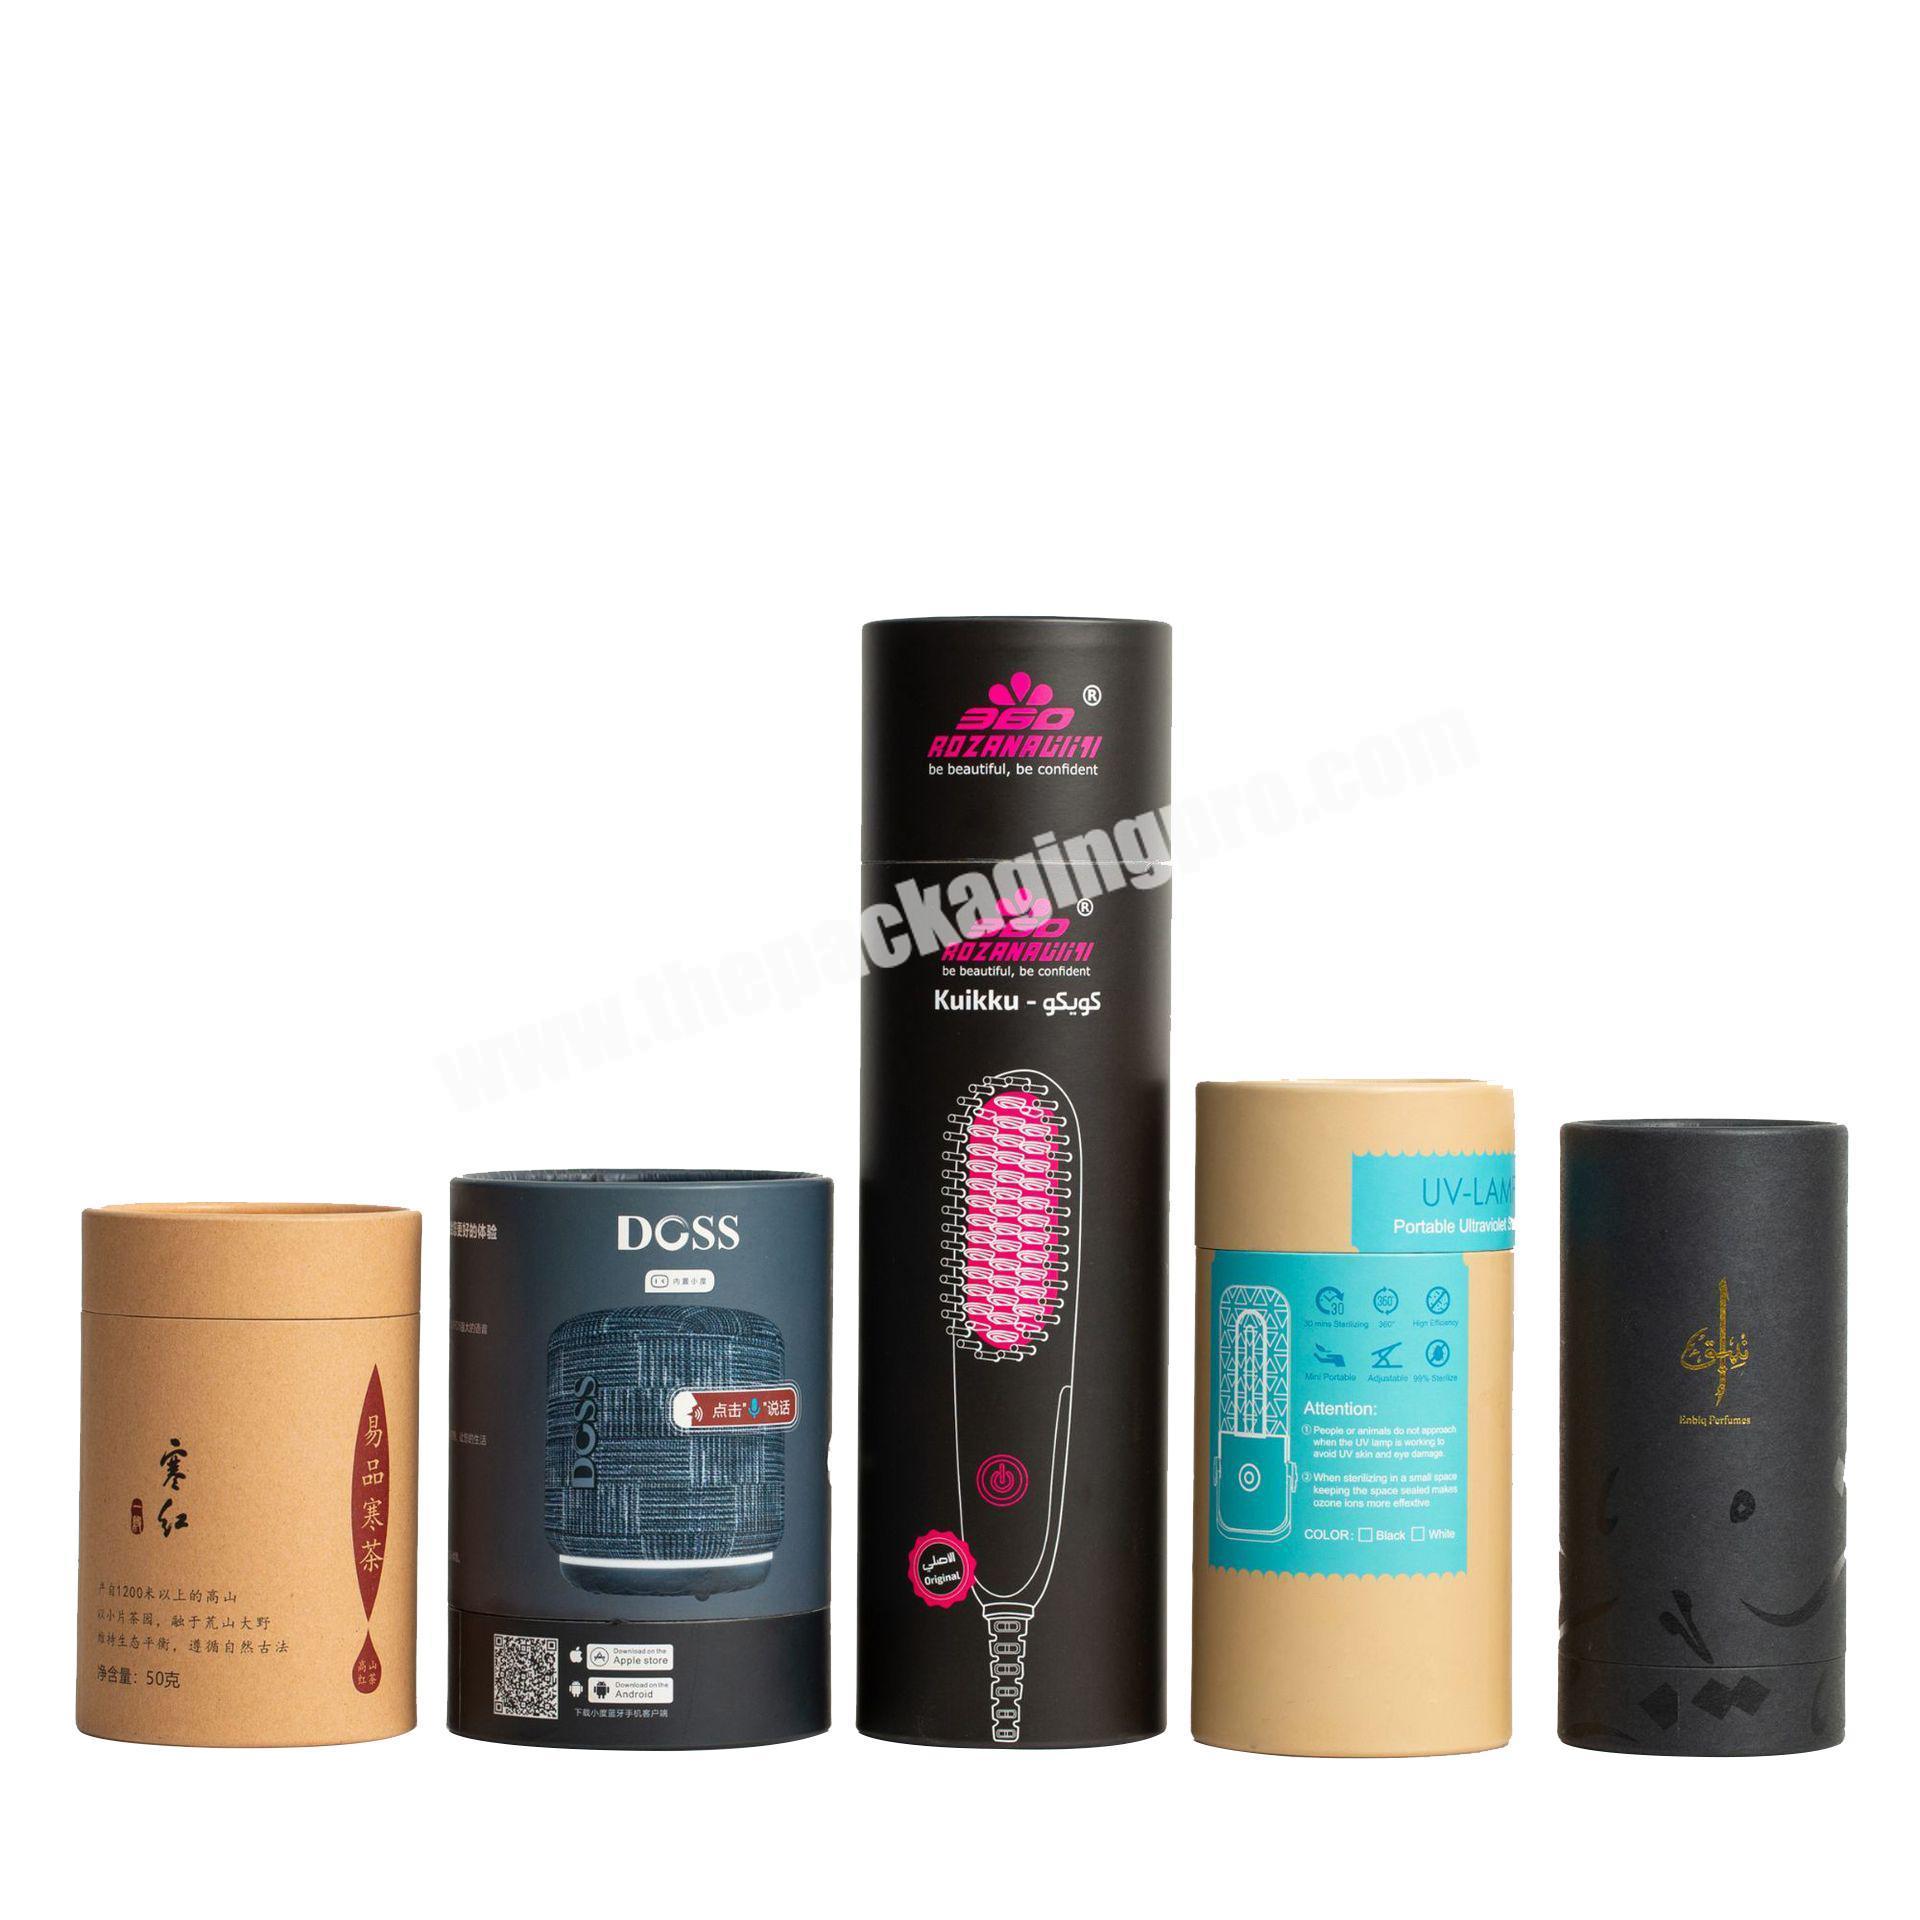 Pepper kraft tube salt spices and herbs packaging loose powder paper tube container with shaker sifter packaging